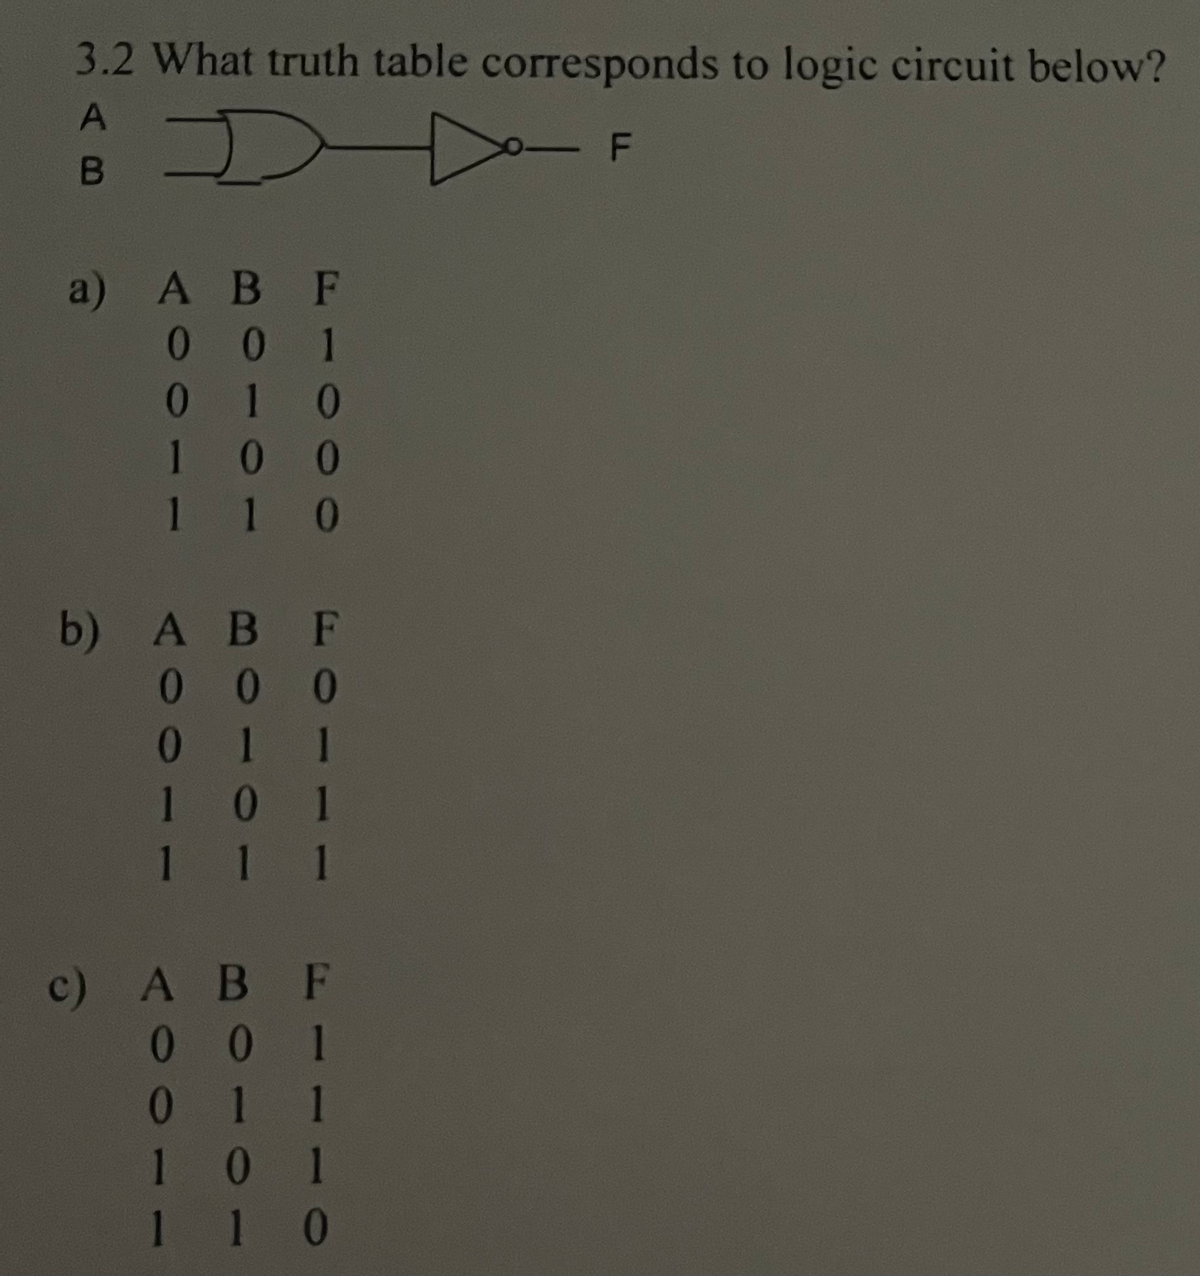 3.2 What truth table corresponds to logic circuit below?
A
D
F
B
a) AB F
001
010
100
110
b) ABF
000
011
101
1 1 1
c) ABF
001
011
101
110